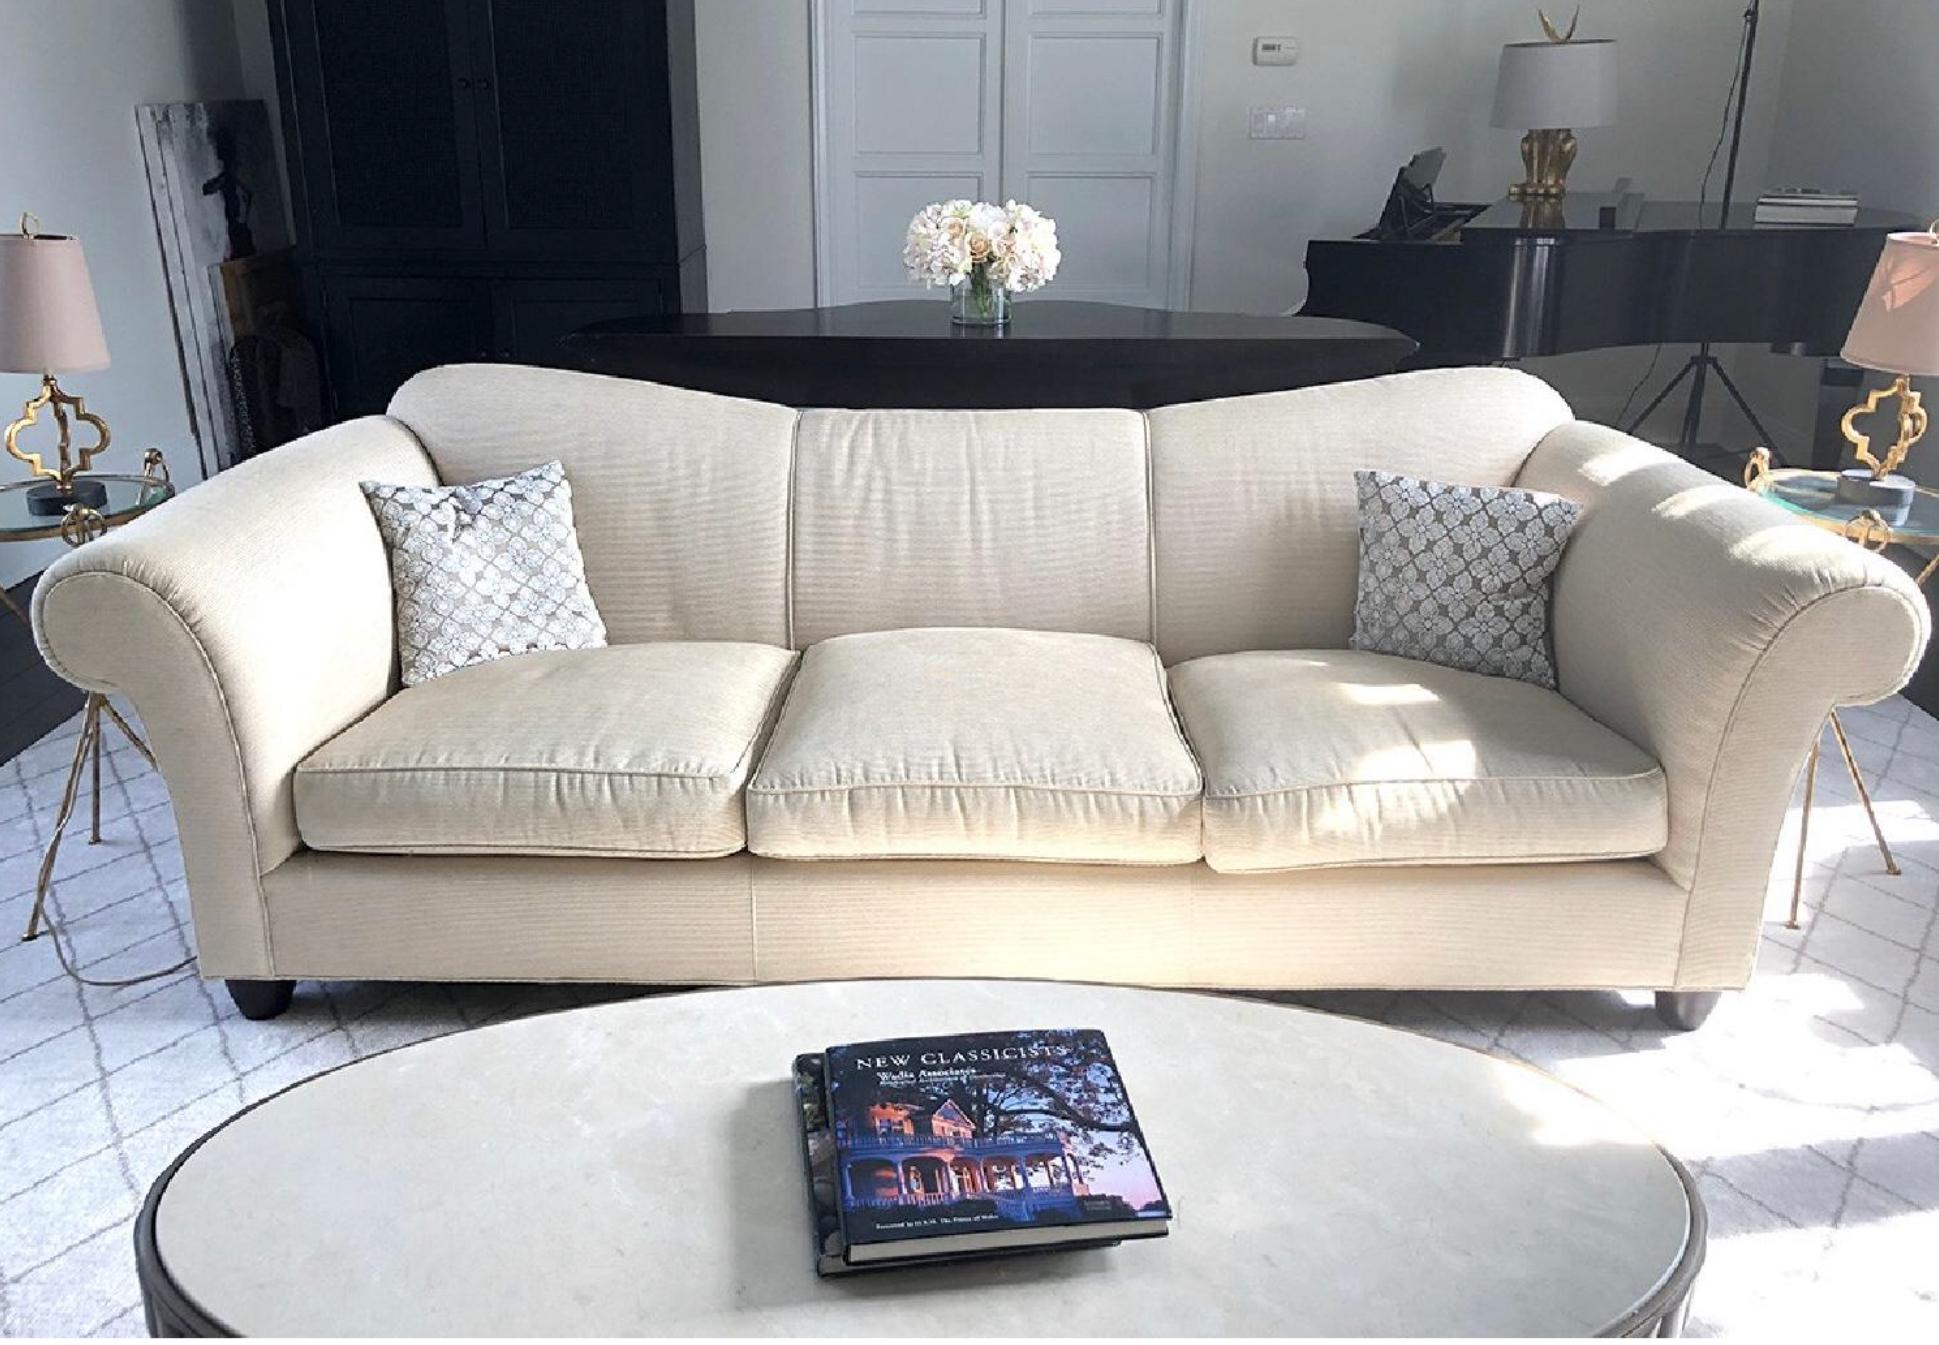 Gorgeous contemporary custom design by Barbara Barry for Baker Furniture, Modern casual American luxury at its finest. Retail price nearly 6000 USD.